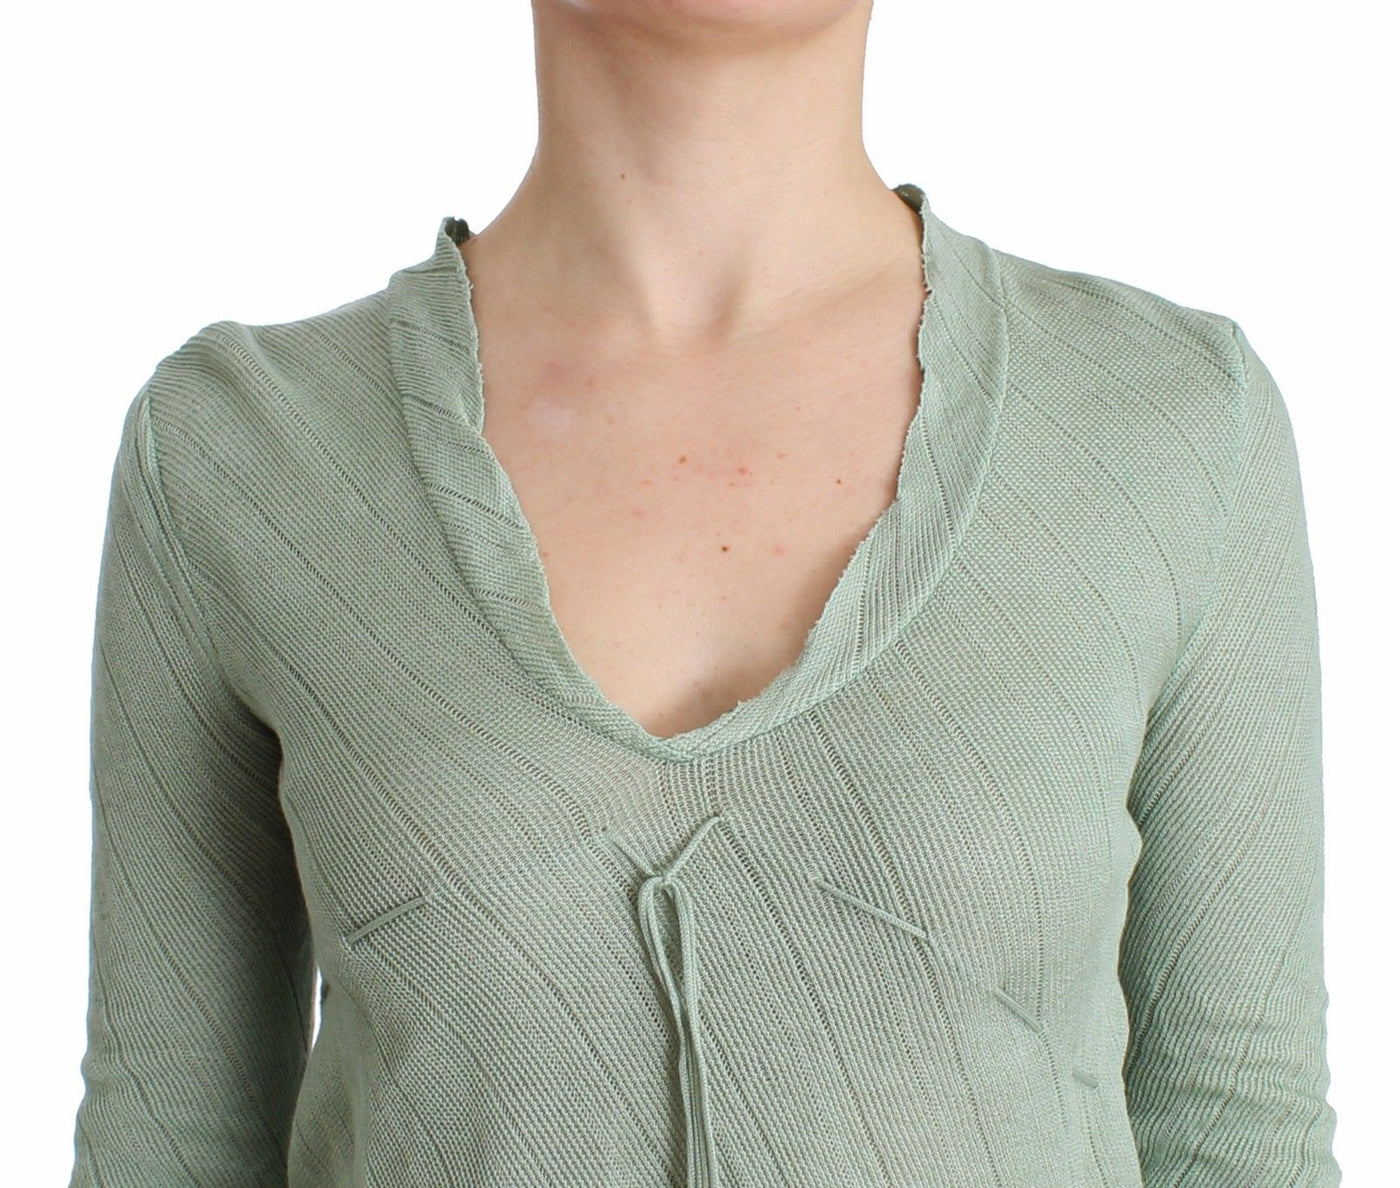 Ermanno Scervino Green Lightweight Knit Sweater Top Blouse